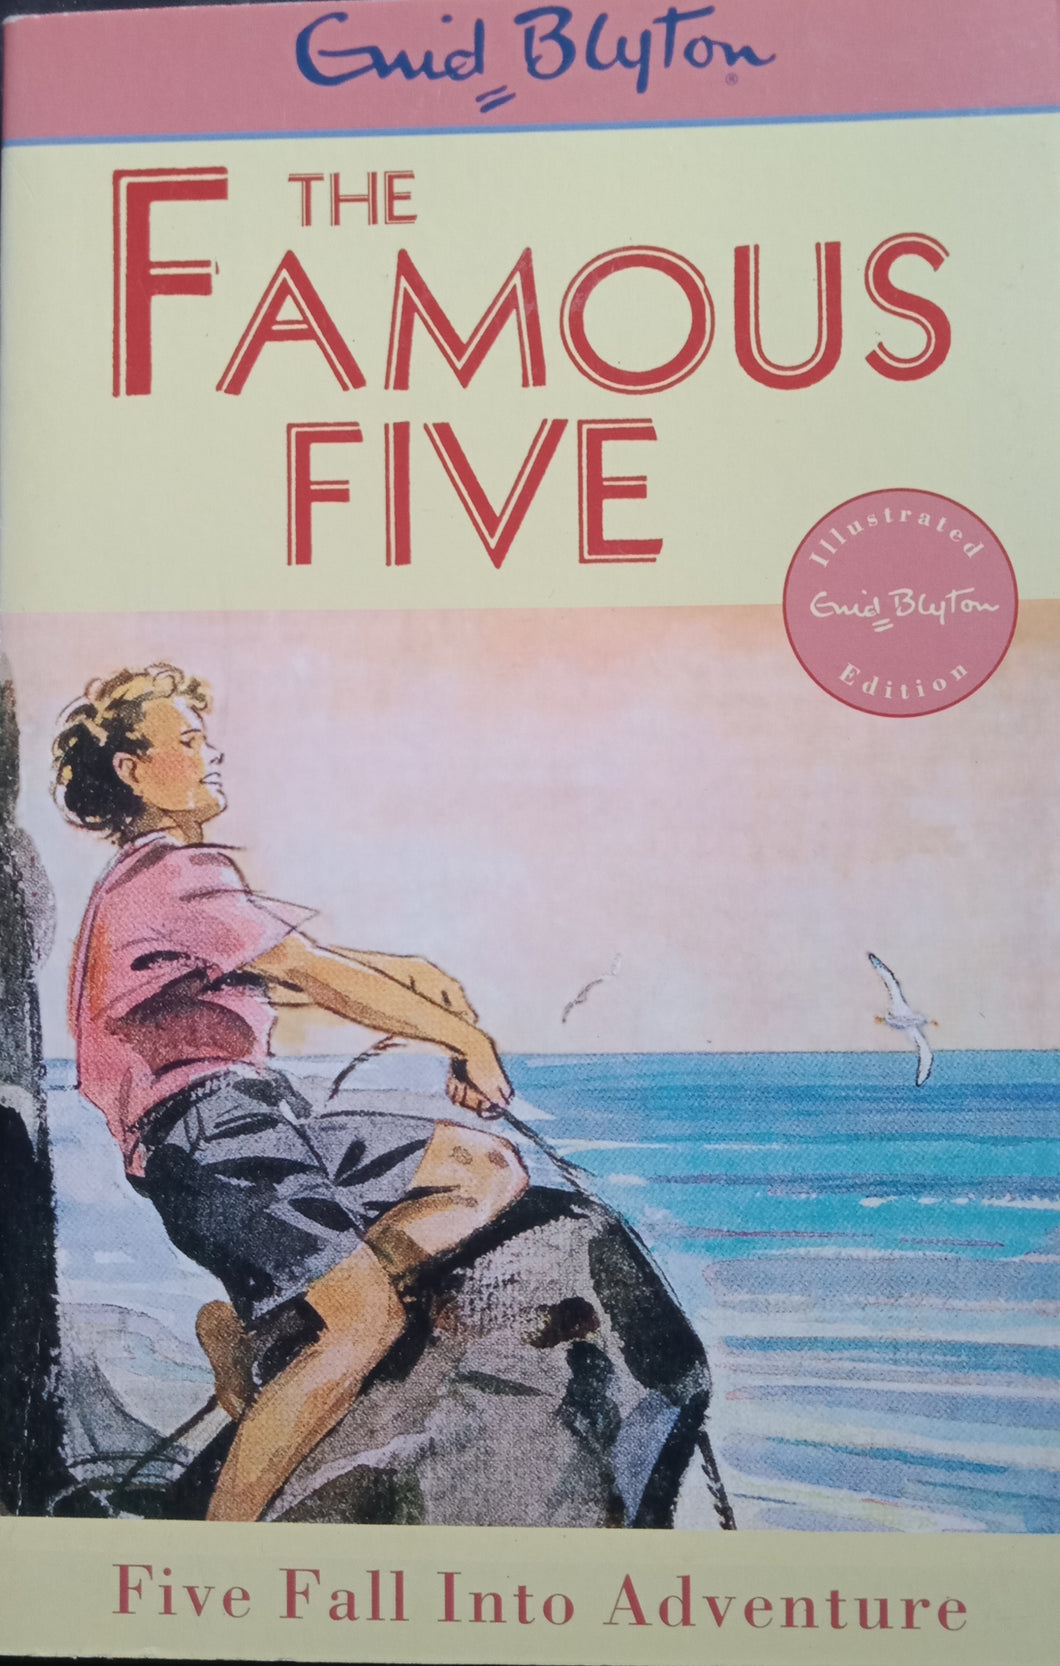 The Famous Five By: Enid Blyton